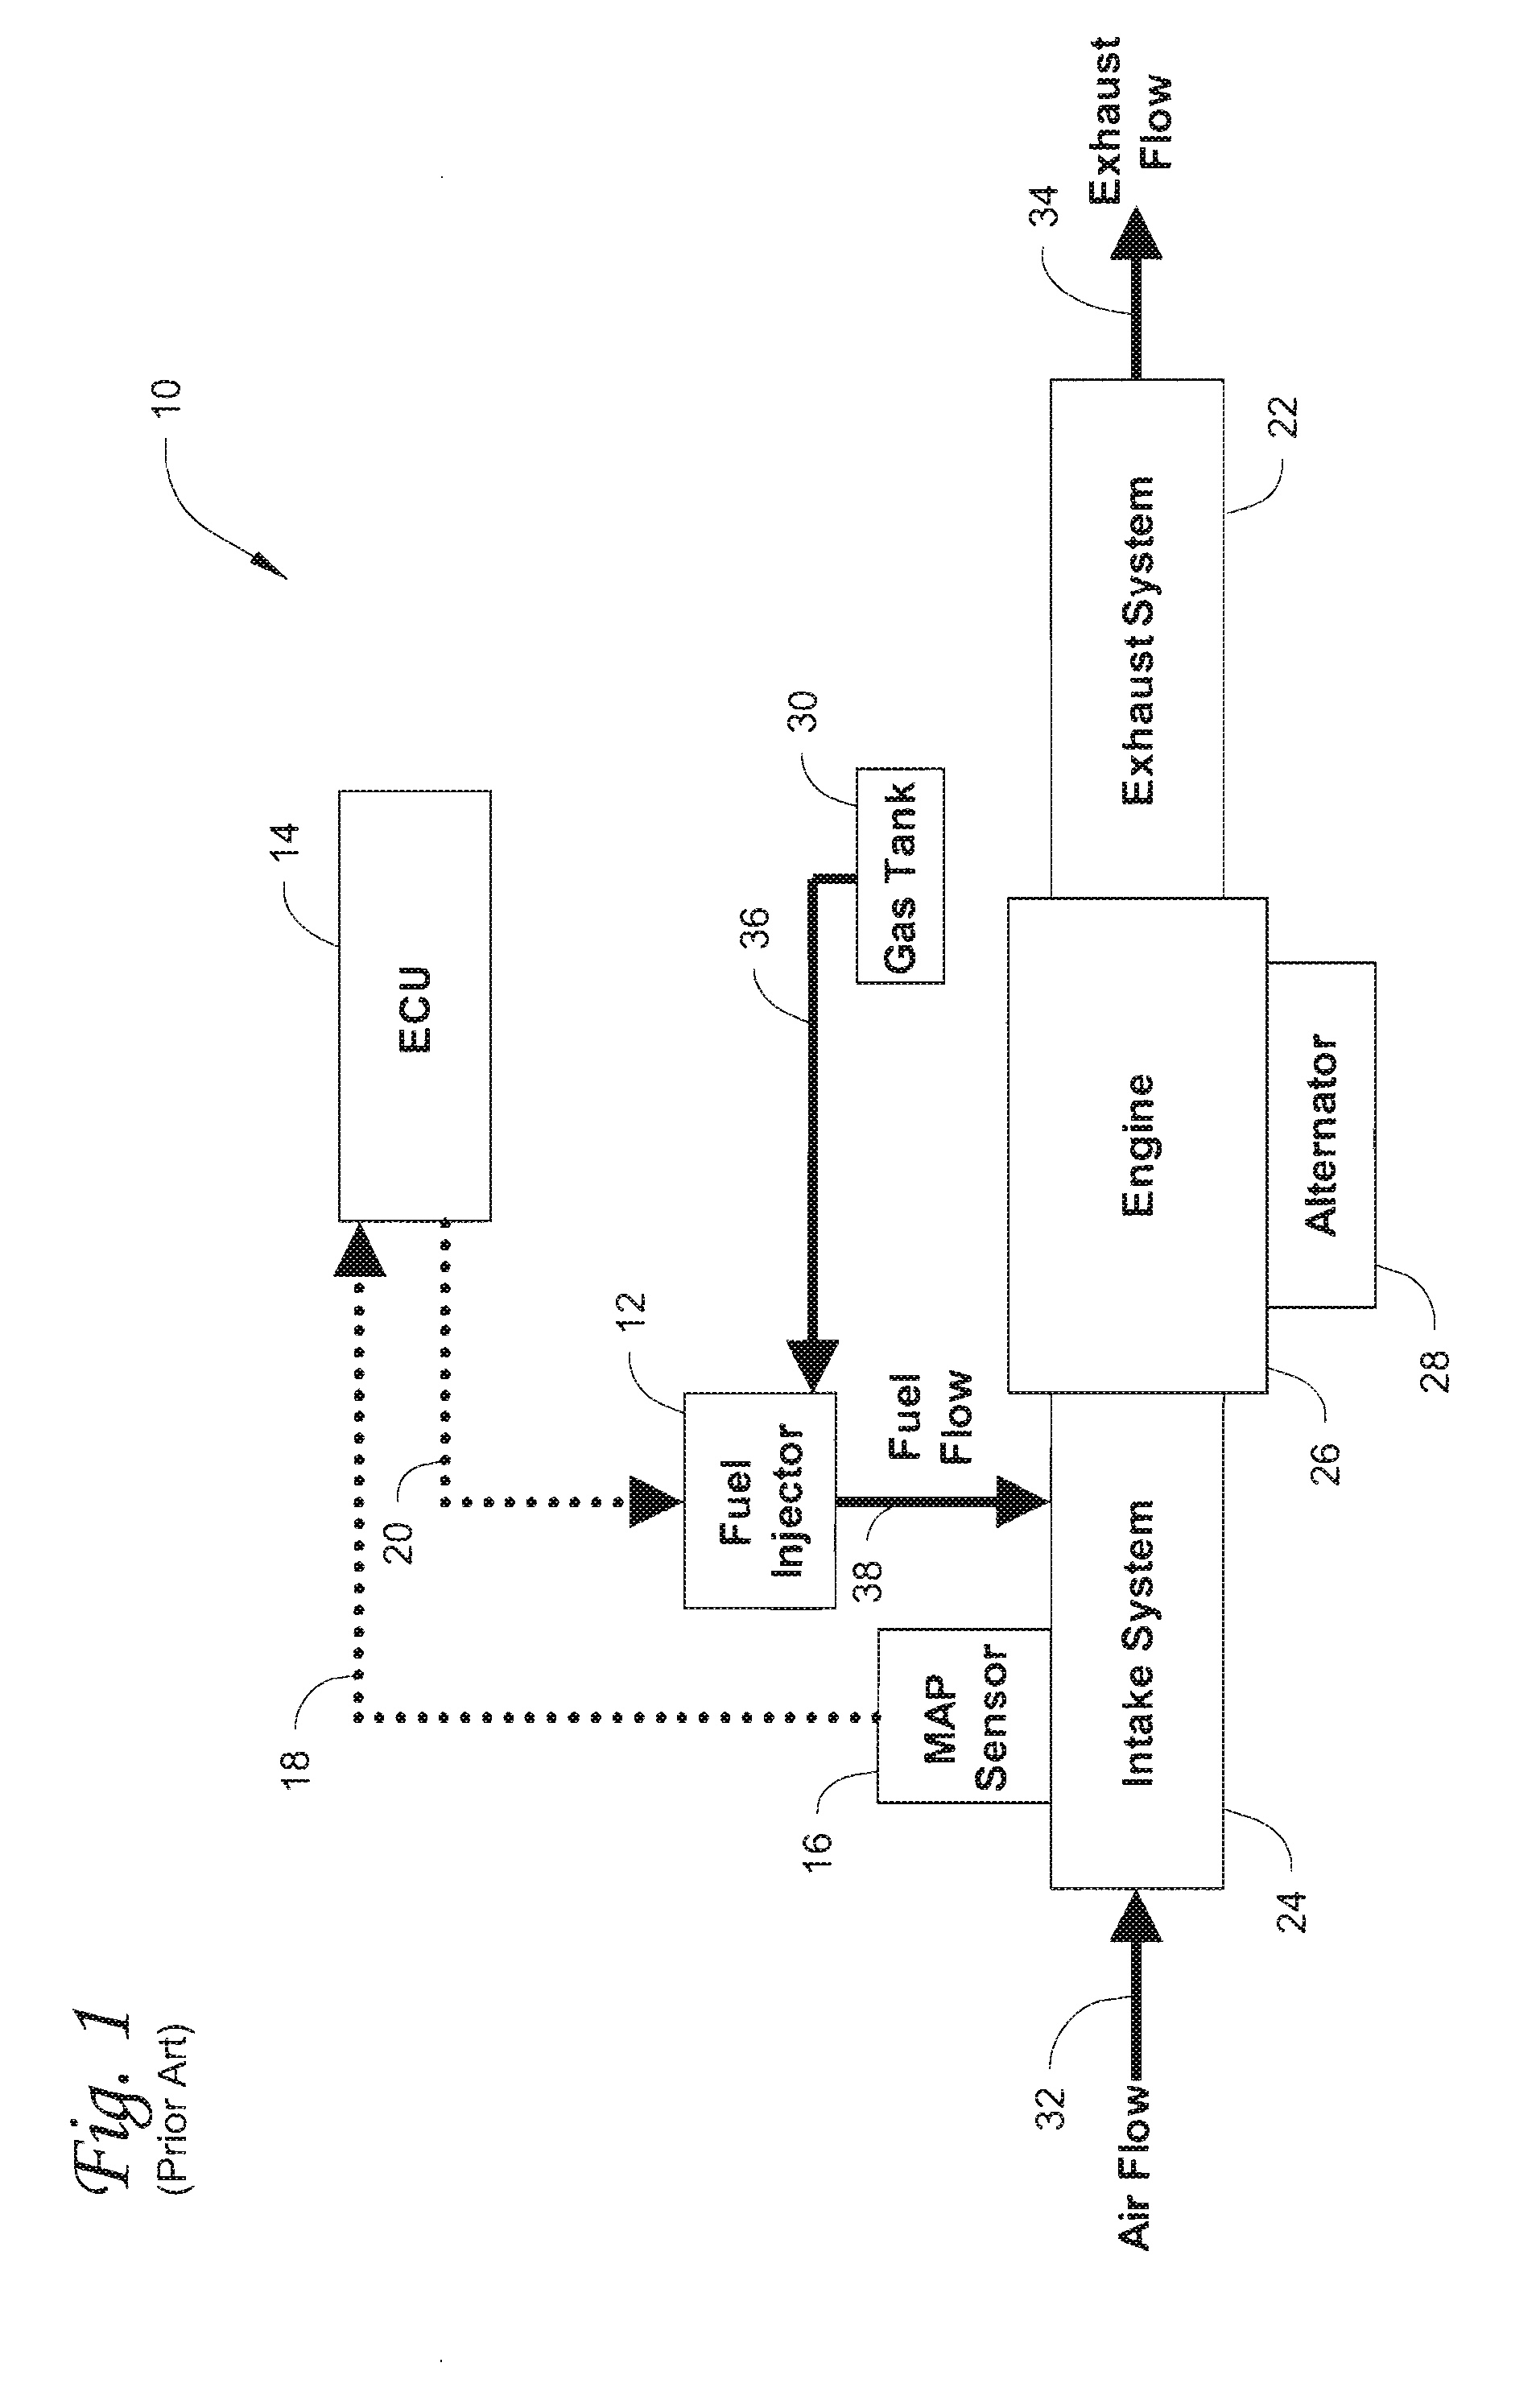 Genset engine with an electronic fuel injection system integrating electrical sensing and crank position sensing